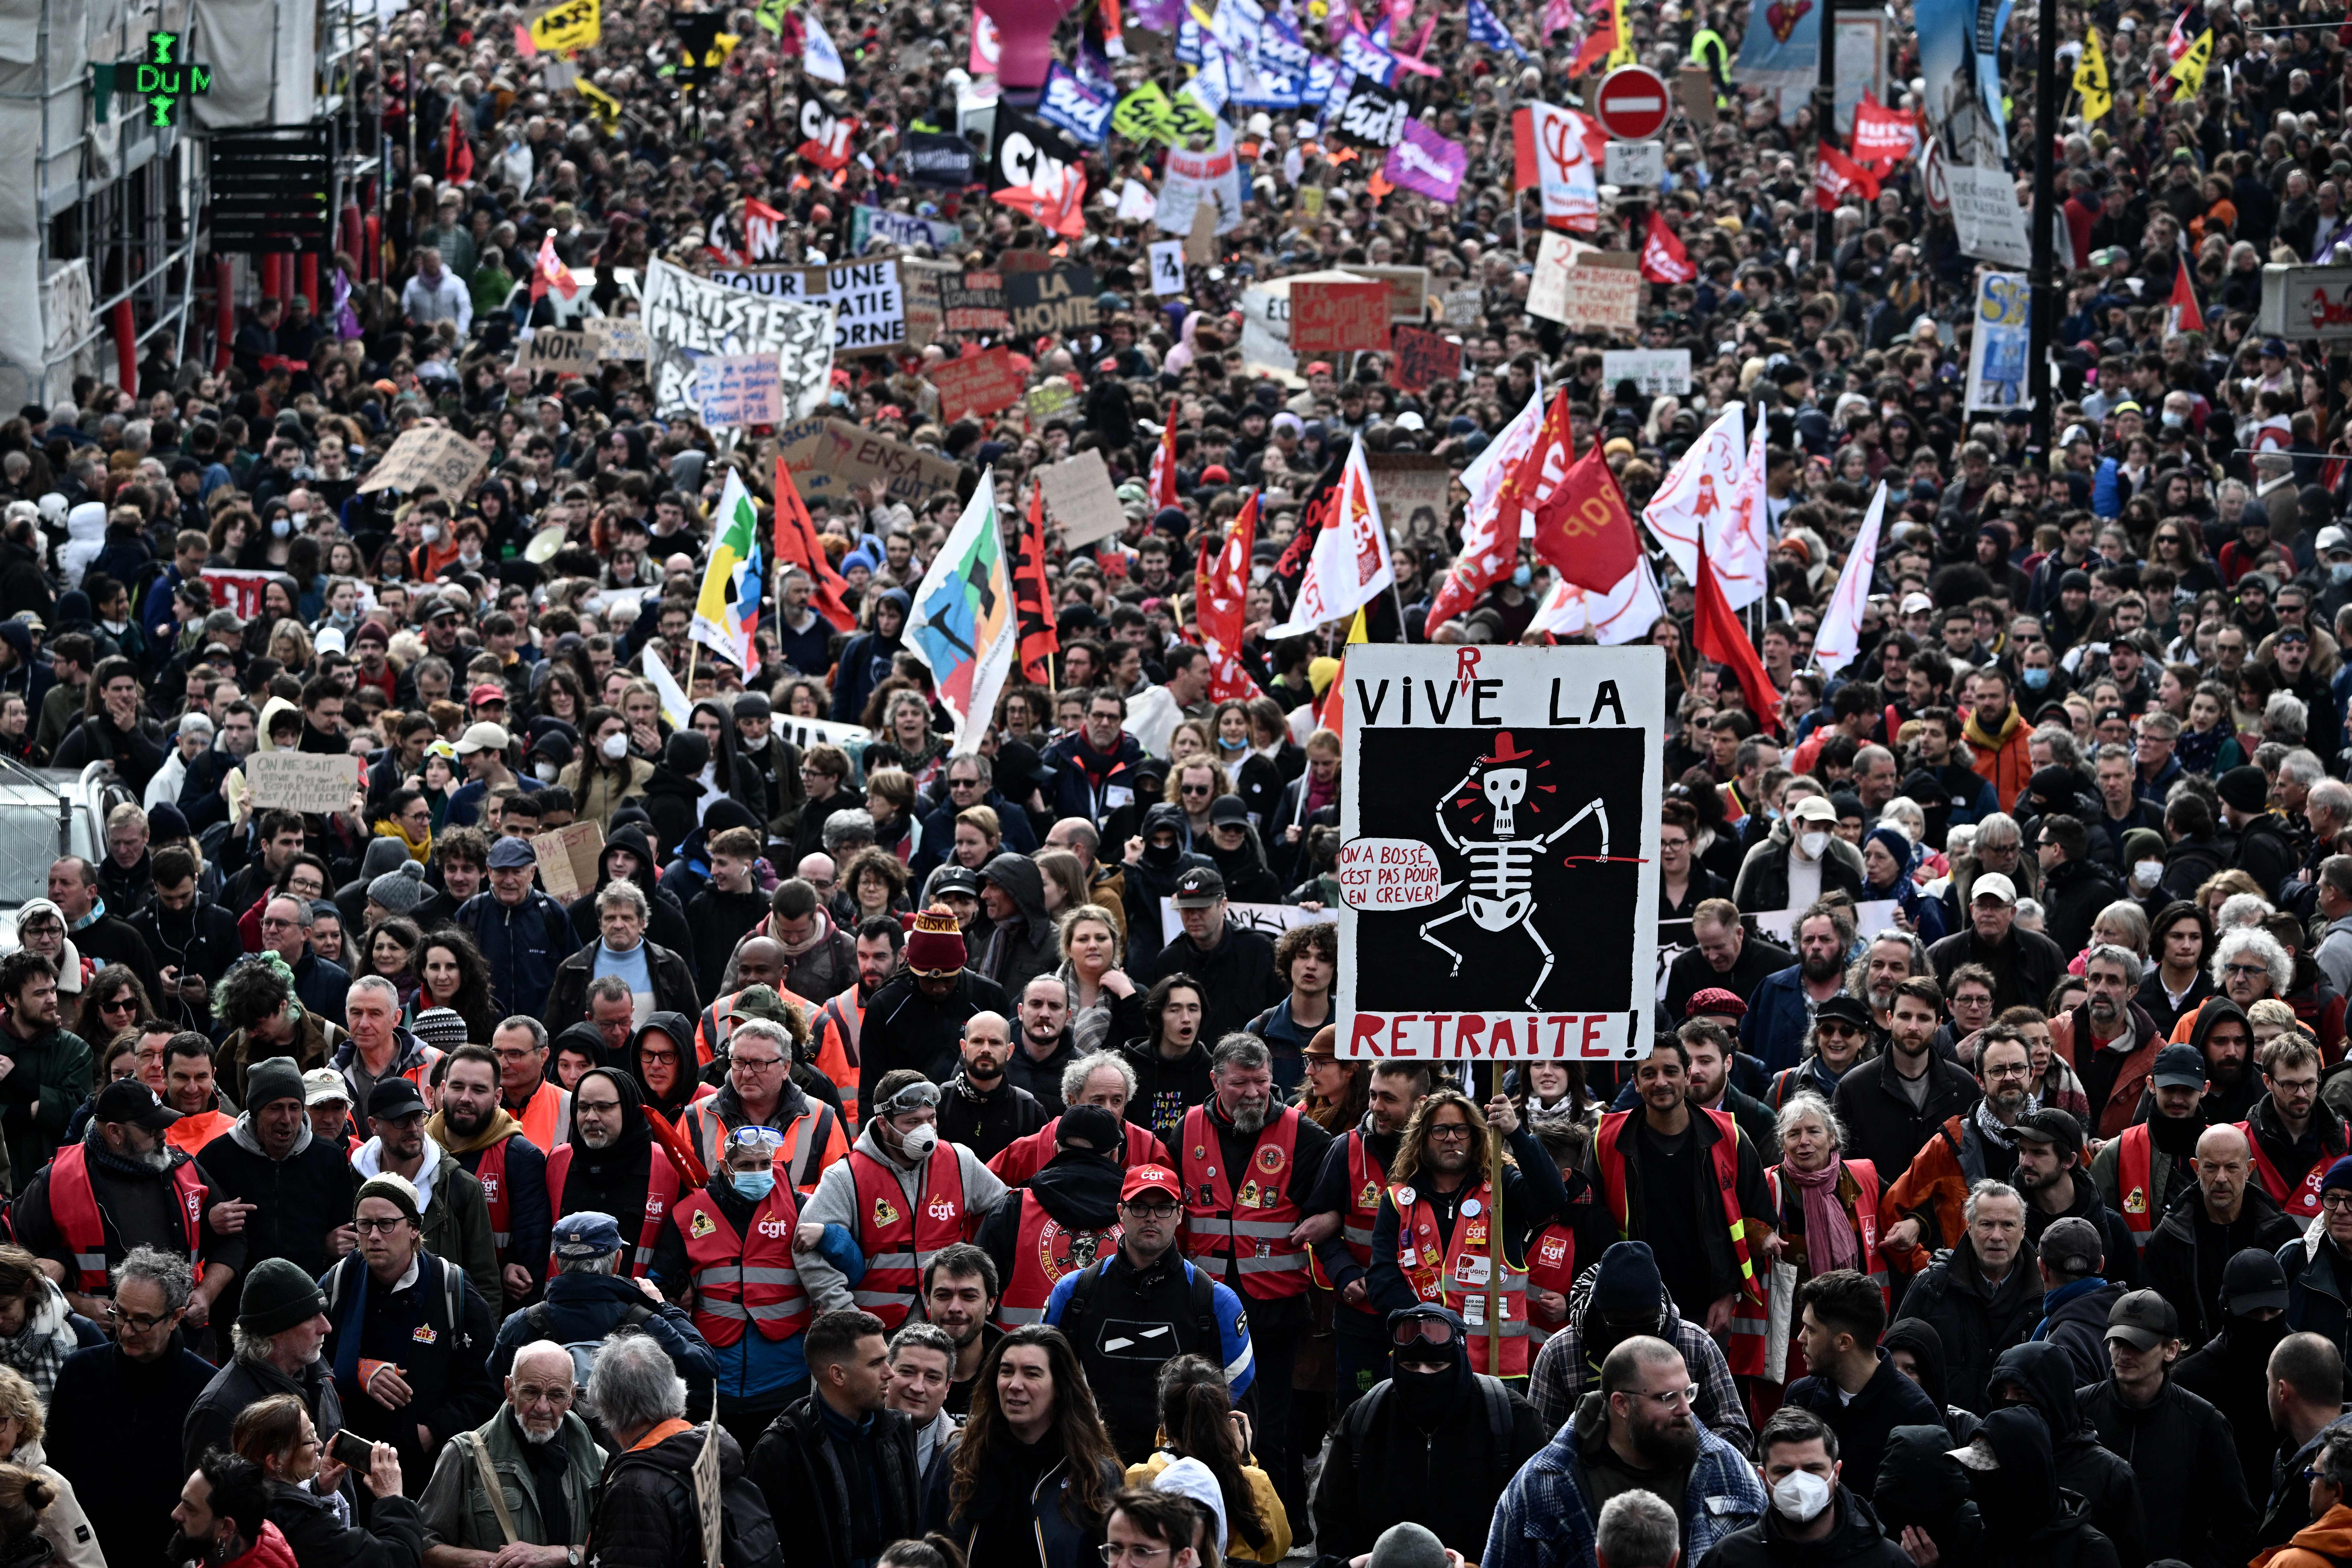 Demonstrations are taking place across France against the increase in the retirement age